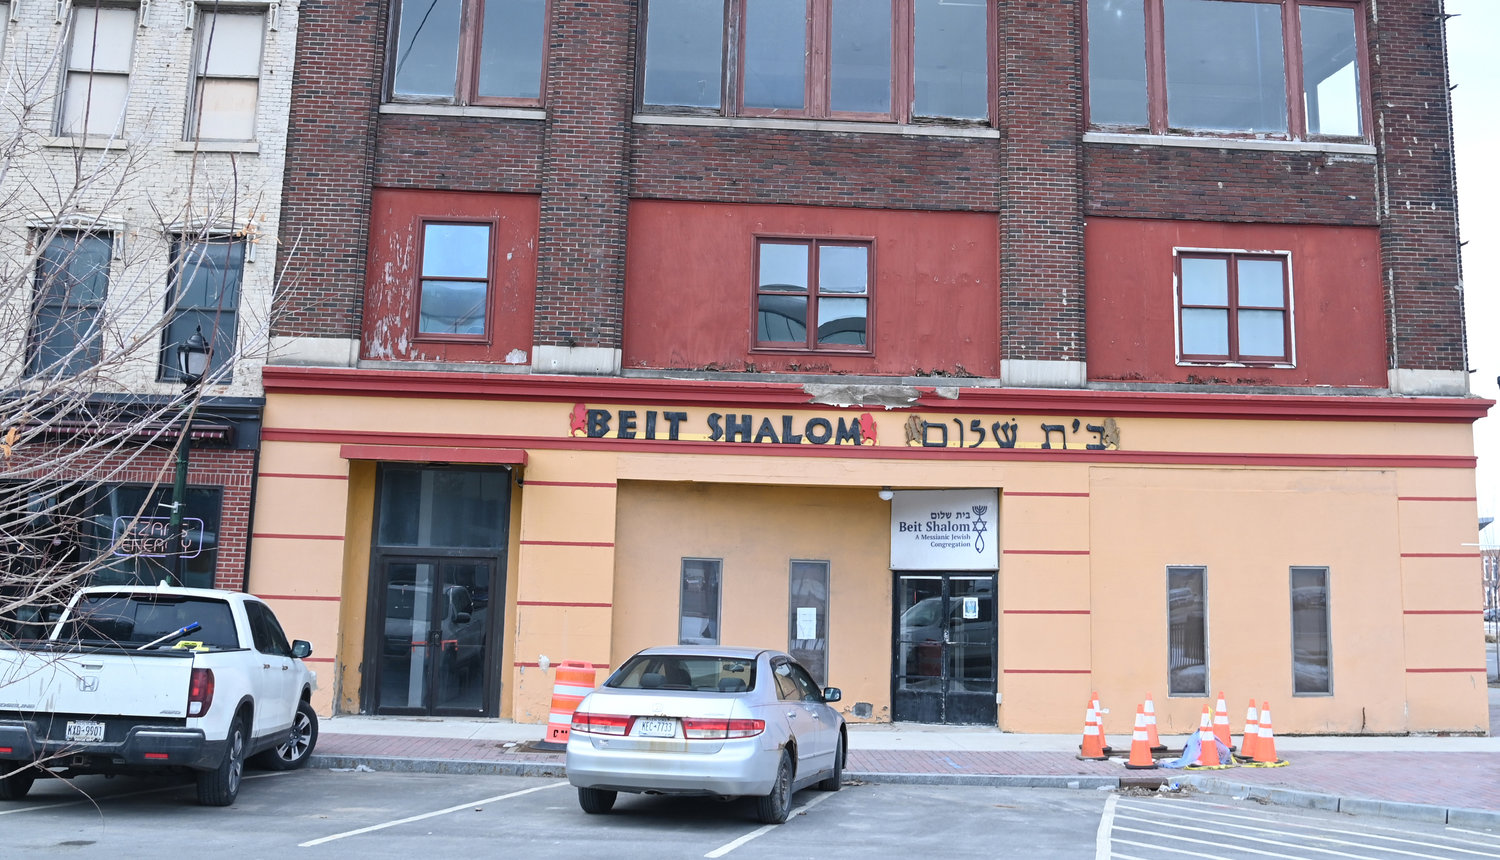 The exterior of the Beit Shalom building is shown in downtown Utica on Wednesday. The synagogue has filed a lawsuit against the city, claiming a violation of the right to conduct religious services.